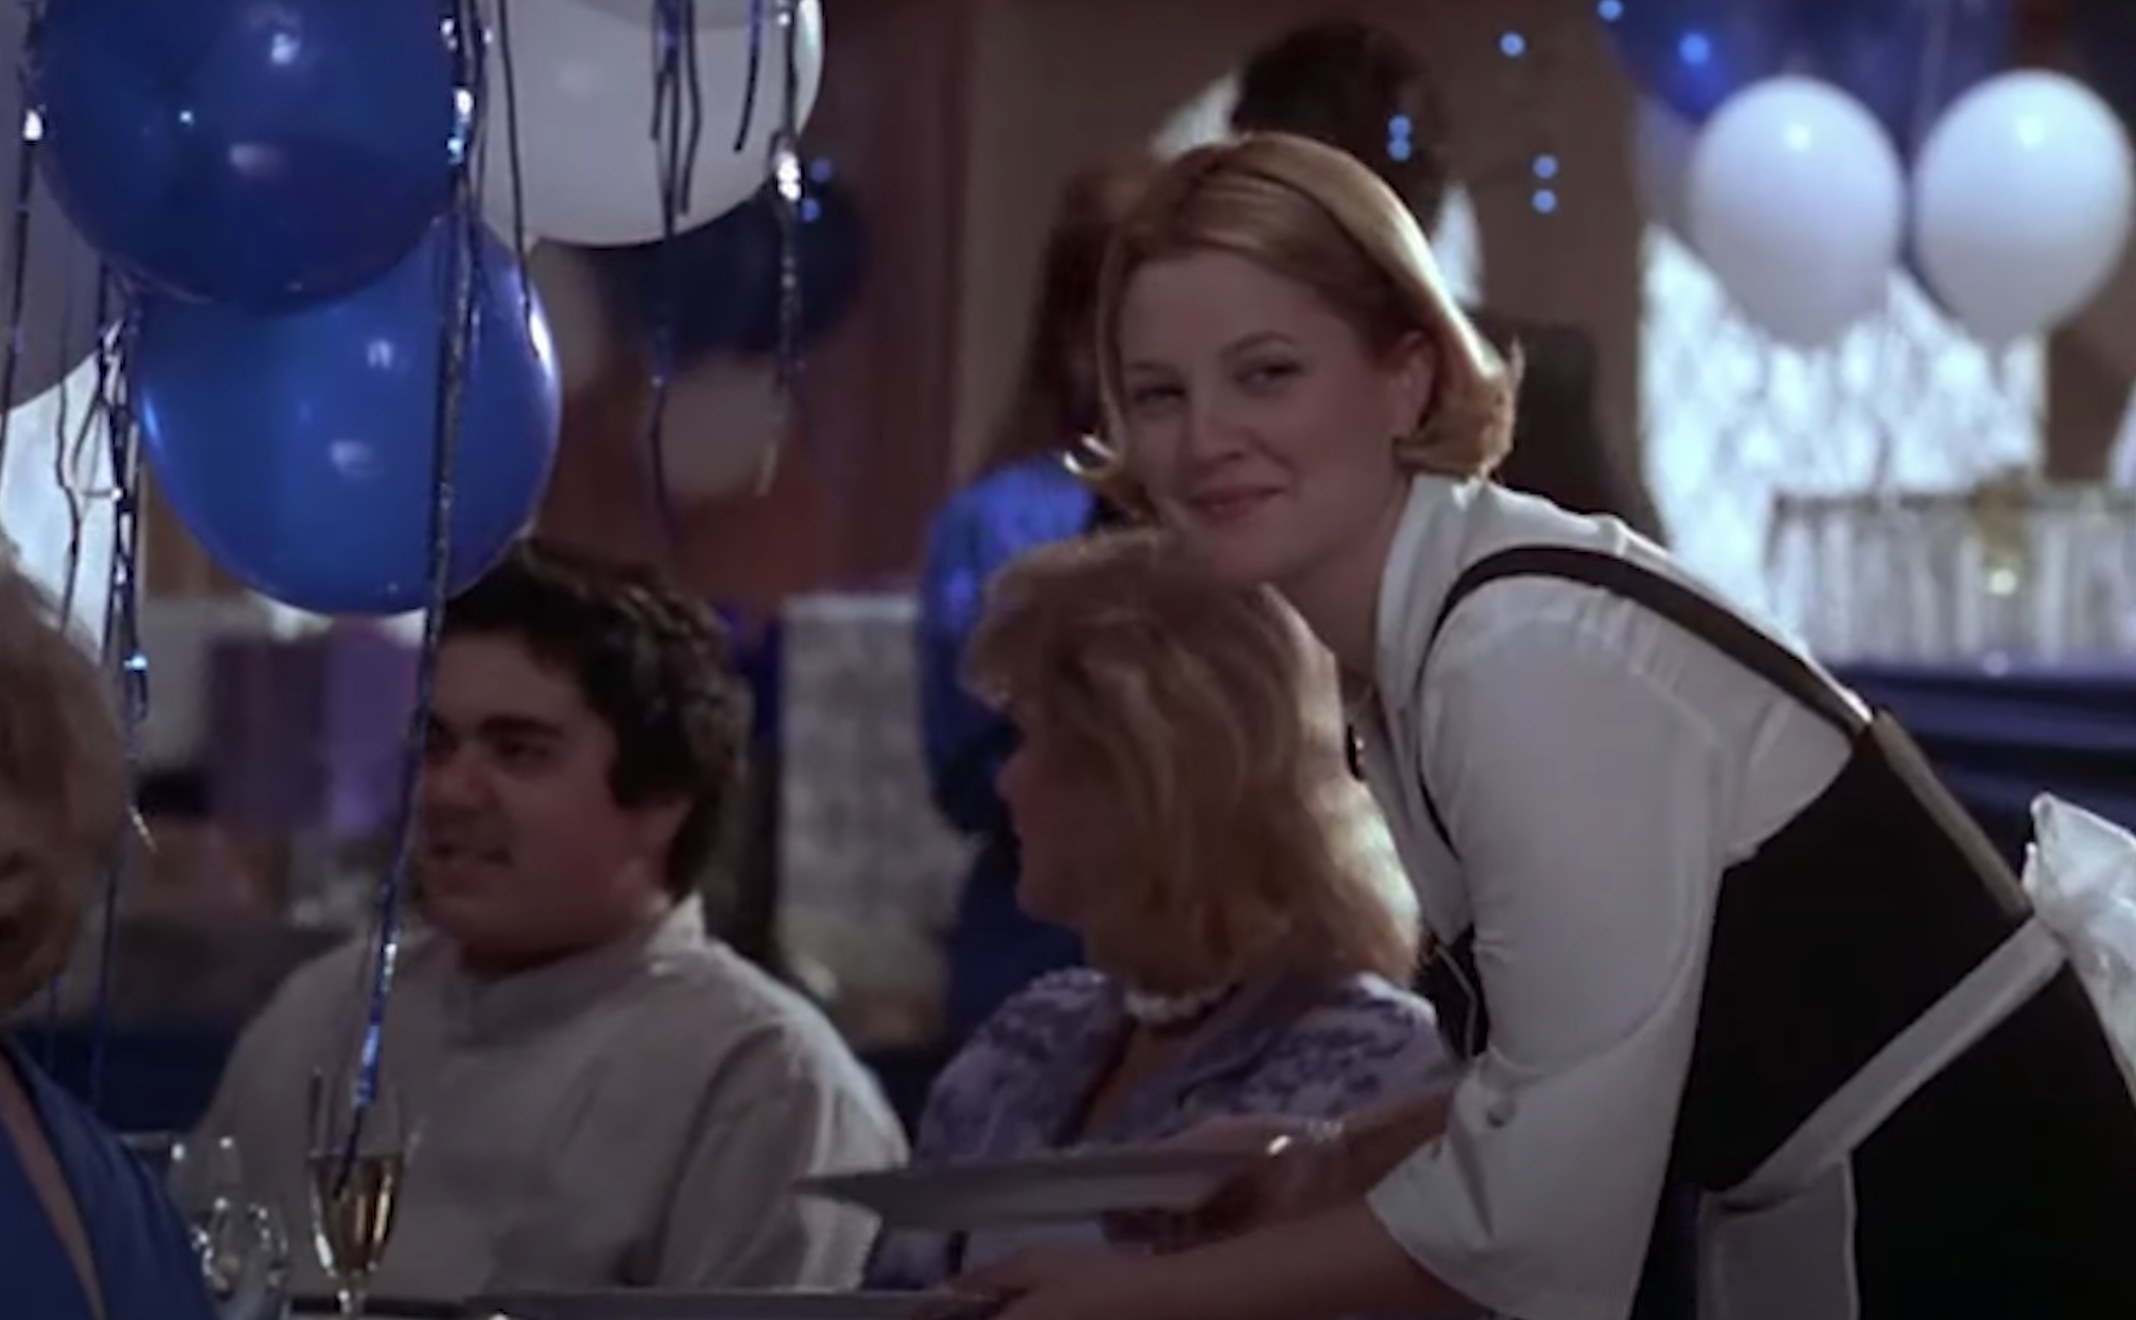 Actor Drew Barrymore is dressed as a server and waits on a table. Blue and white balloons are in the background.